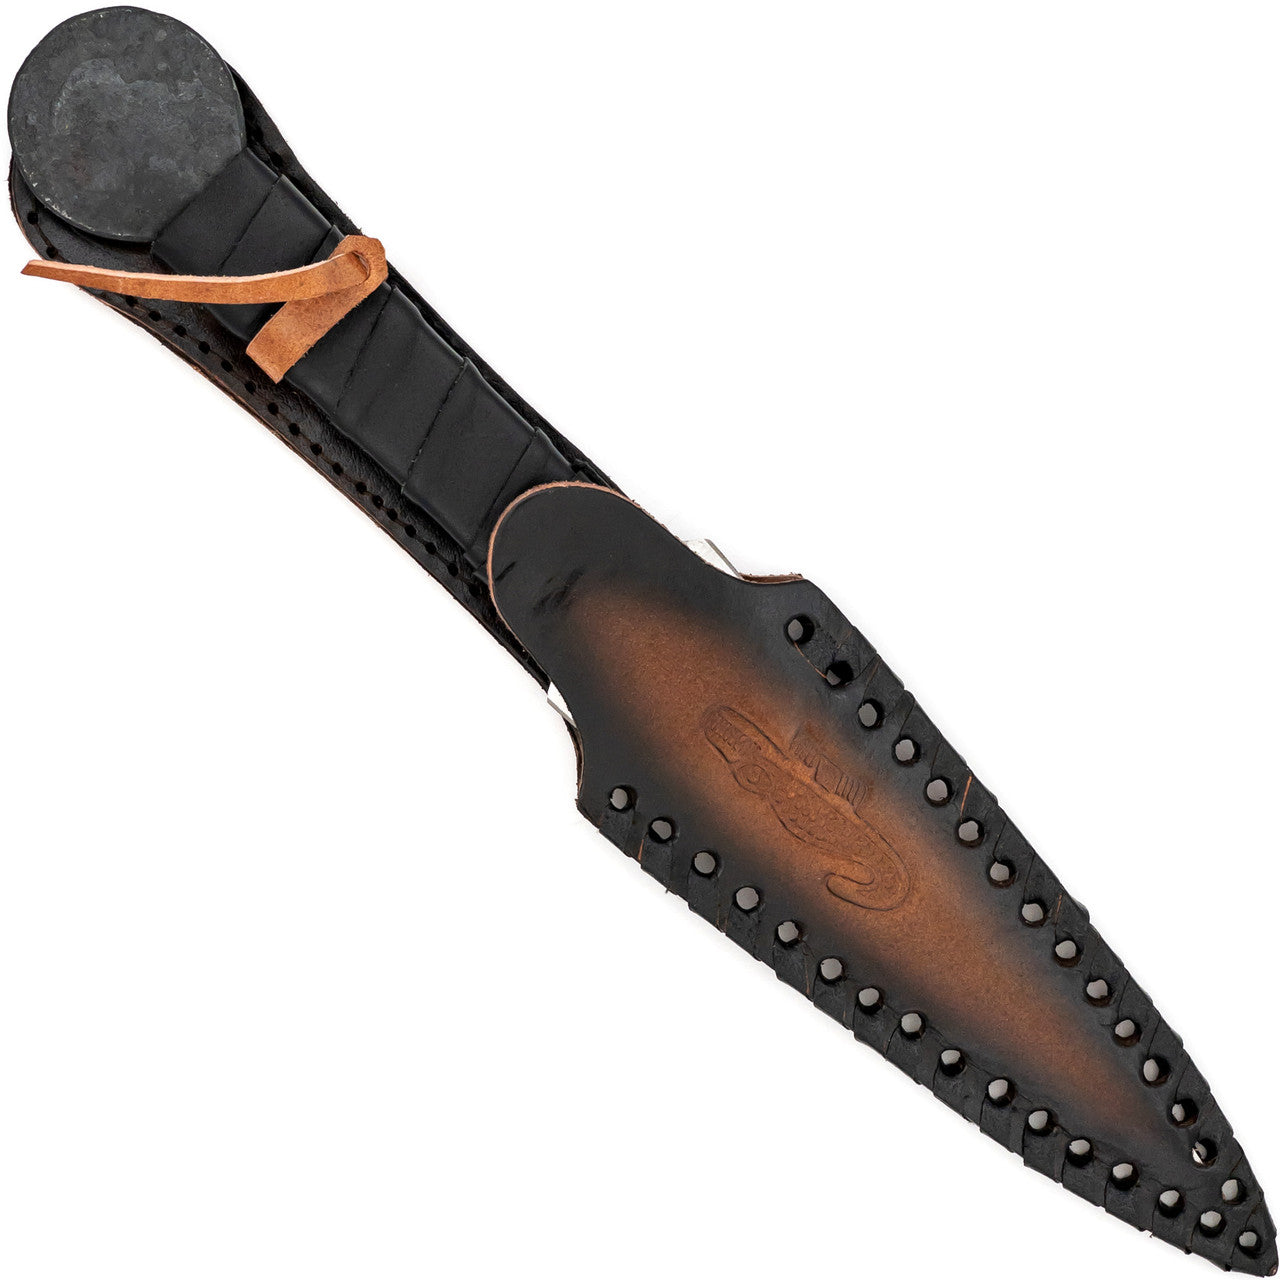 Soaring Heights Forged Carbon Steel Medieval Viking Style Throwing Dagger Knife-3